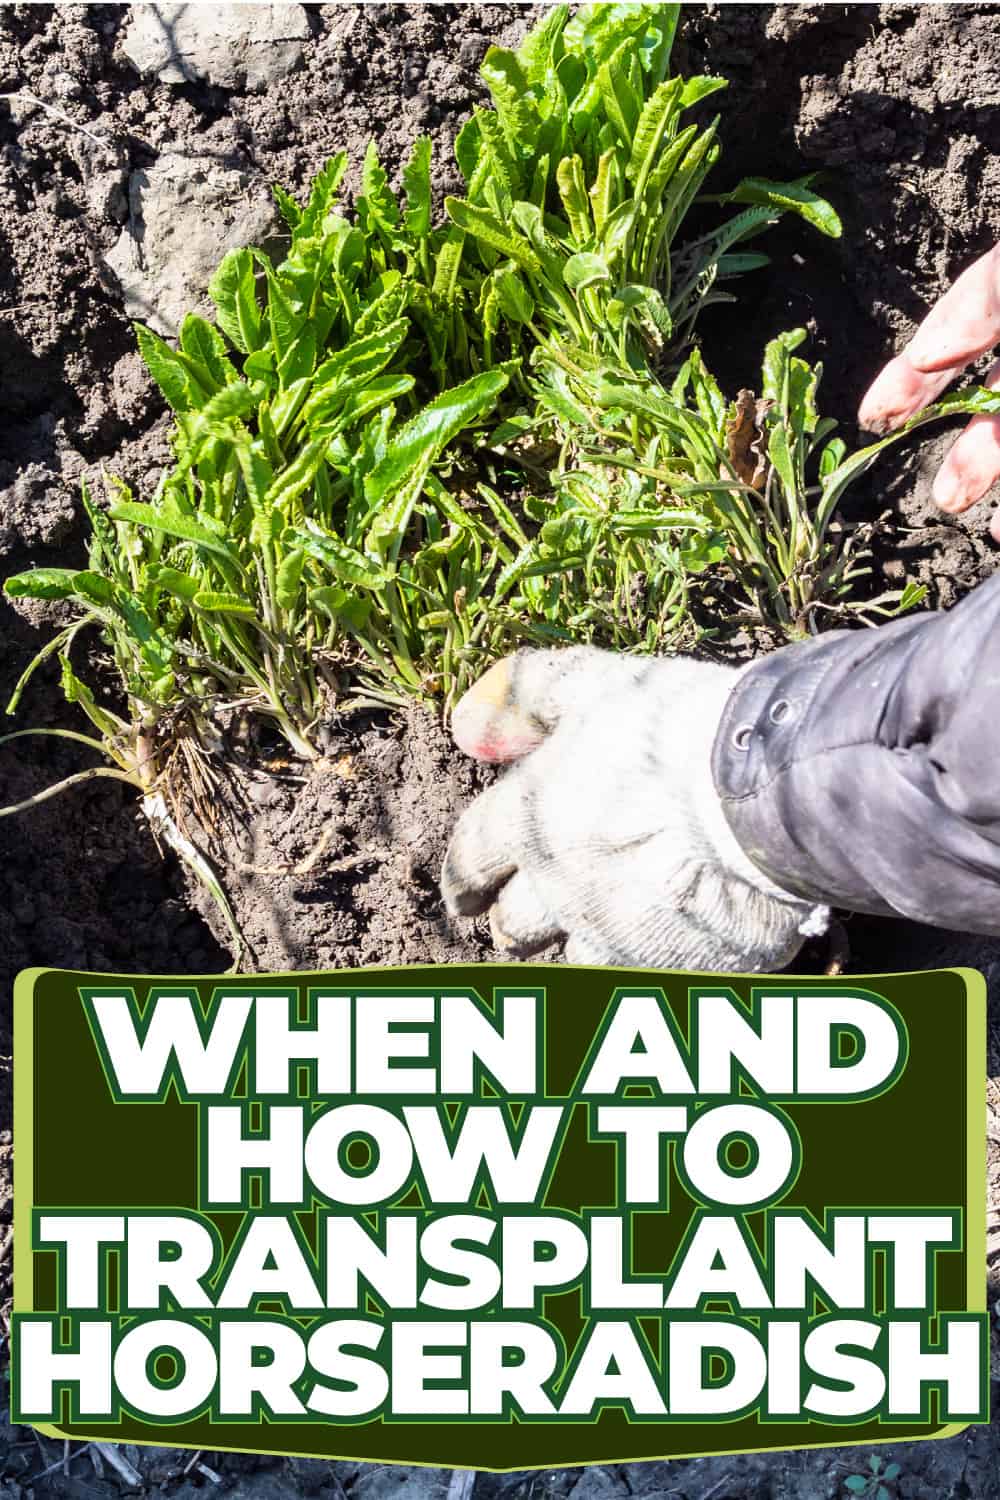 When And How To Transplant Horseradish